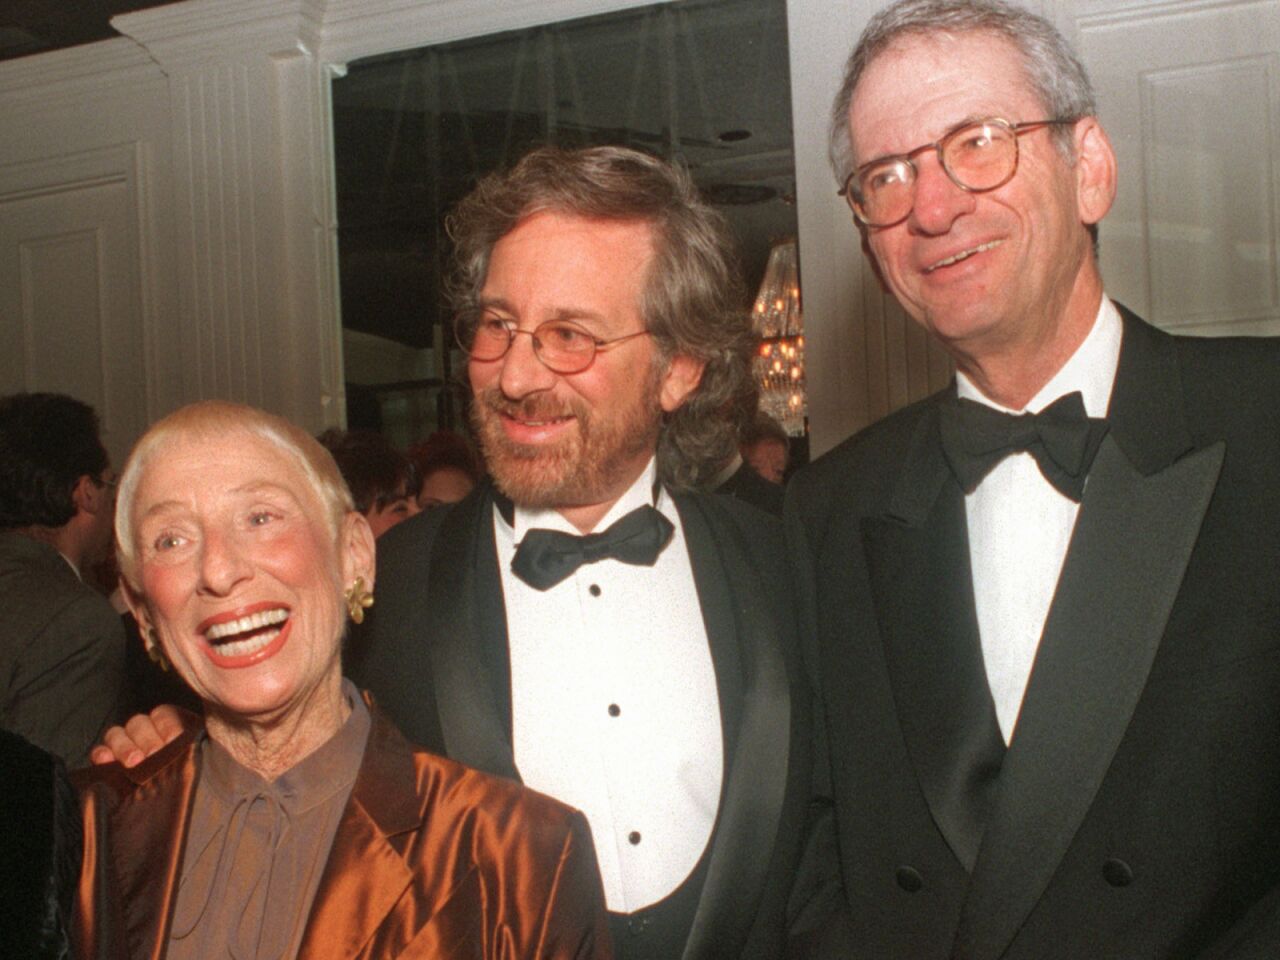 Sidney Sheinberg, right, with Steven Spielberg and Lea Adler, Spielberg's mother, at a 1994 Beverly Hilton gala.